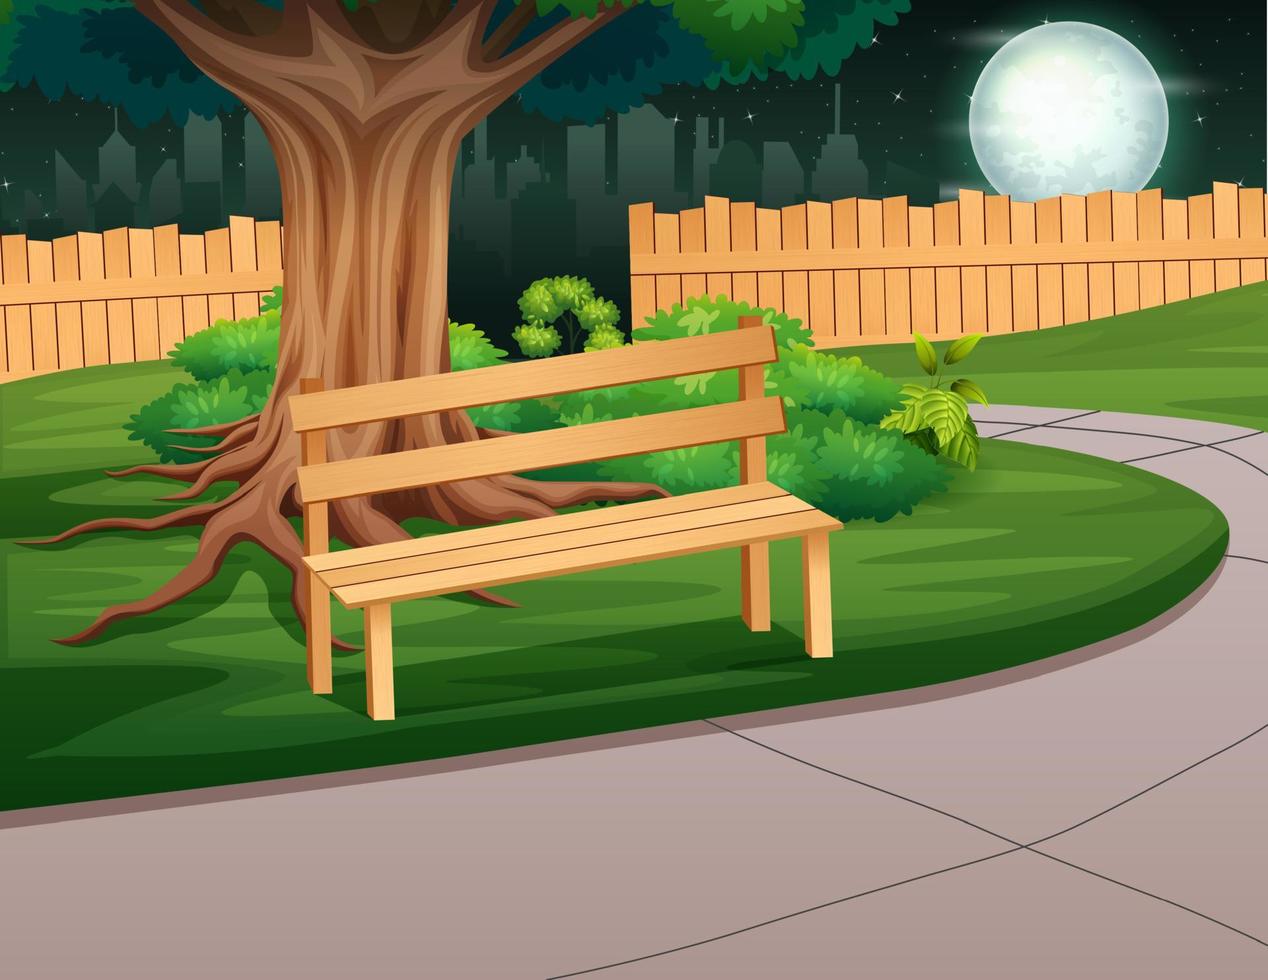 A wooden bench in the park at night landscape vector